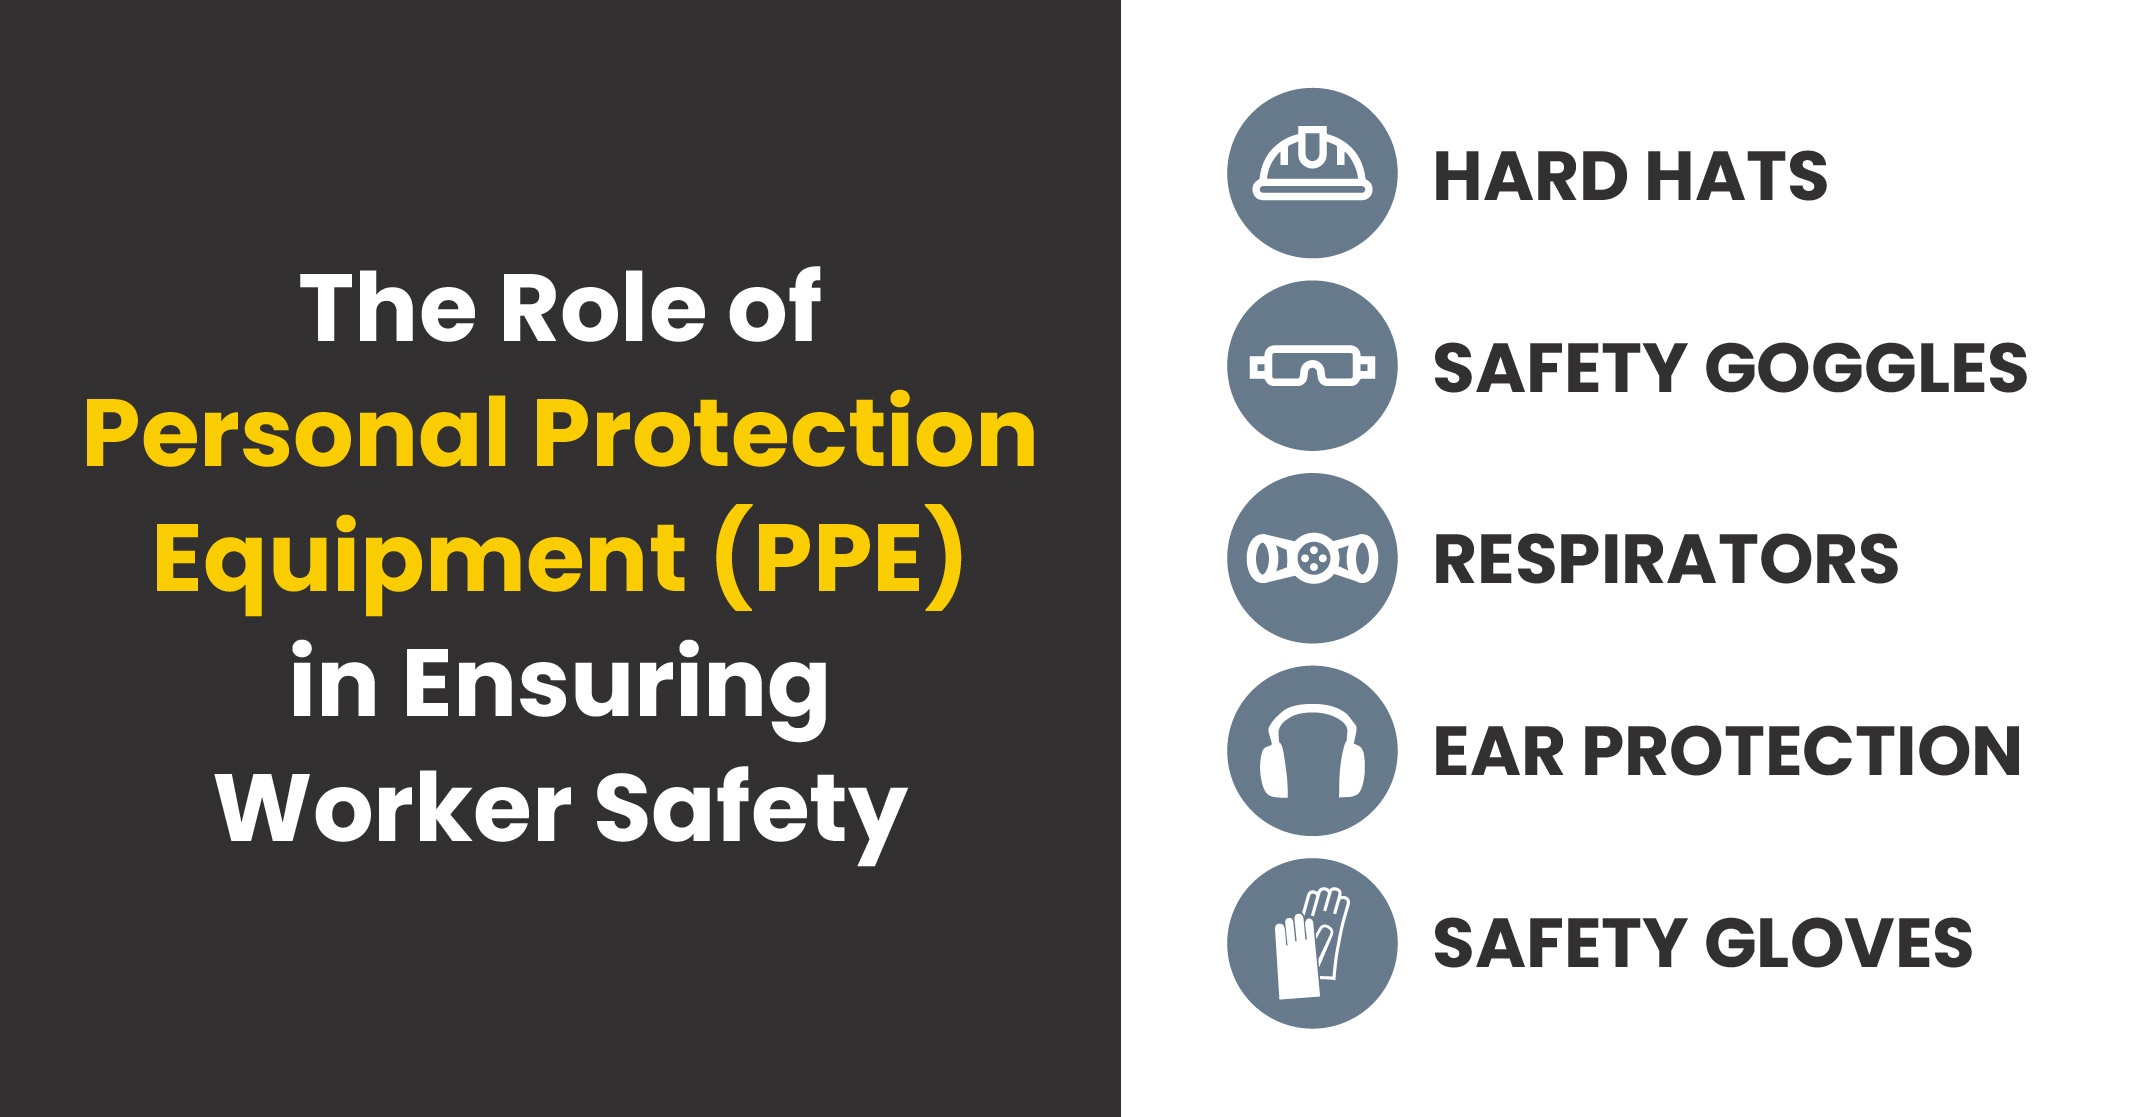 The Role of Personal Protection Equipment (PPE) in Ensuring Worker Safety with Hard Hats, Safety Goggles, Respirators, Ear Protection, and Safety Gloves listed with icons at right.